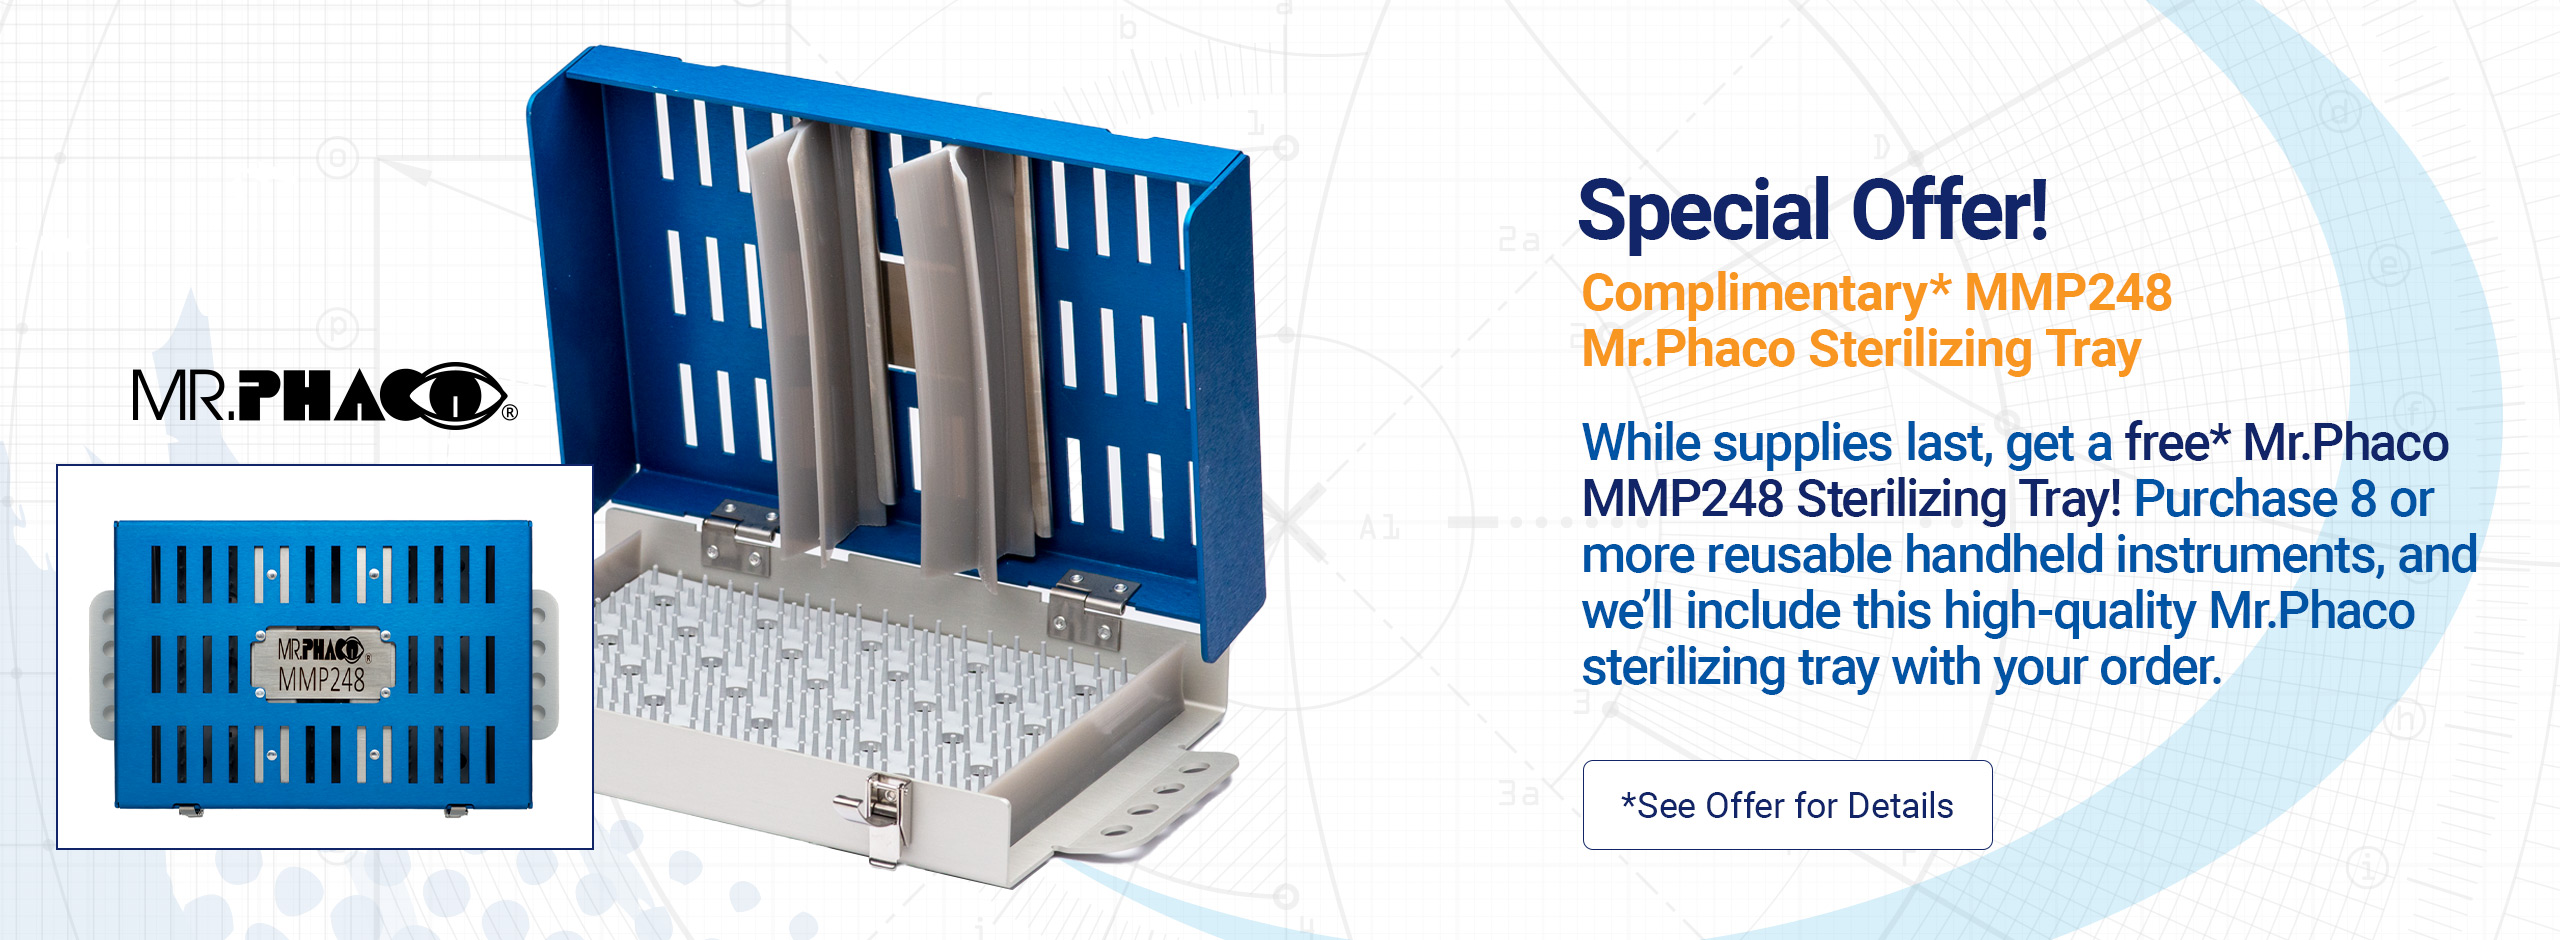 Special Offer! Mr.Phaco MMP248 Surgical Sterilizing Tray